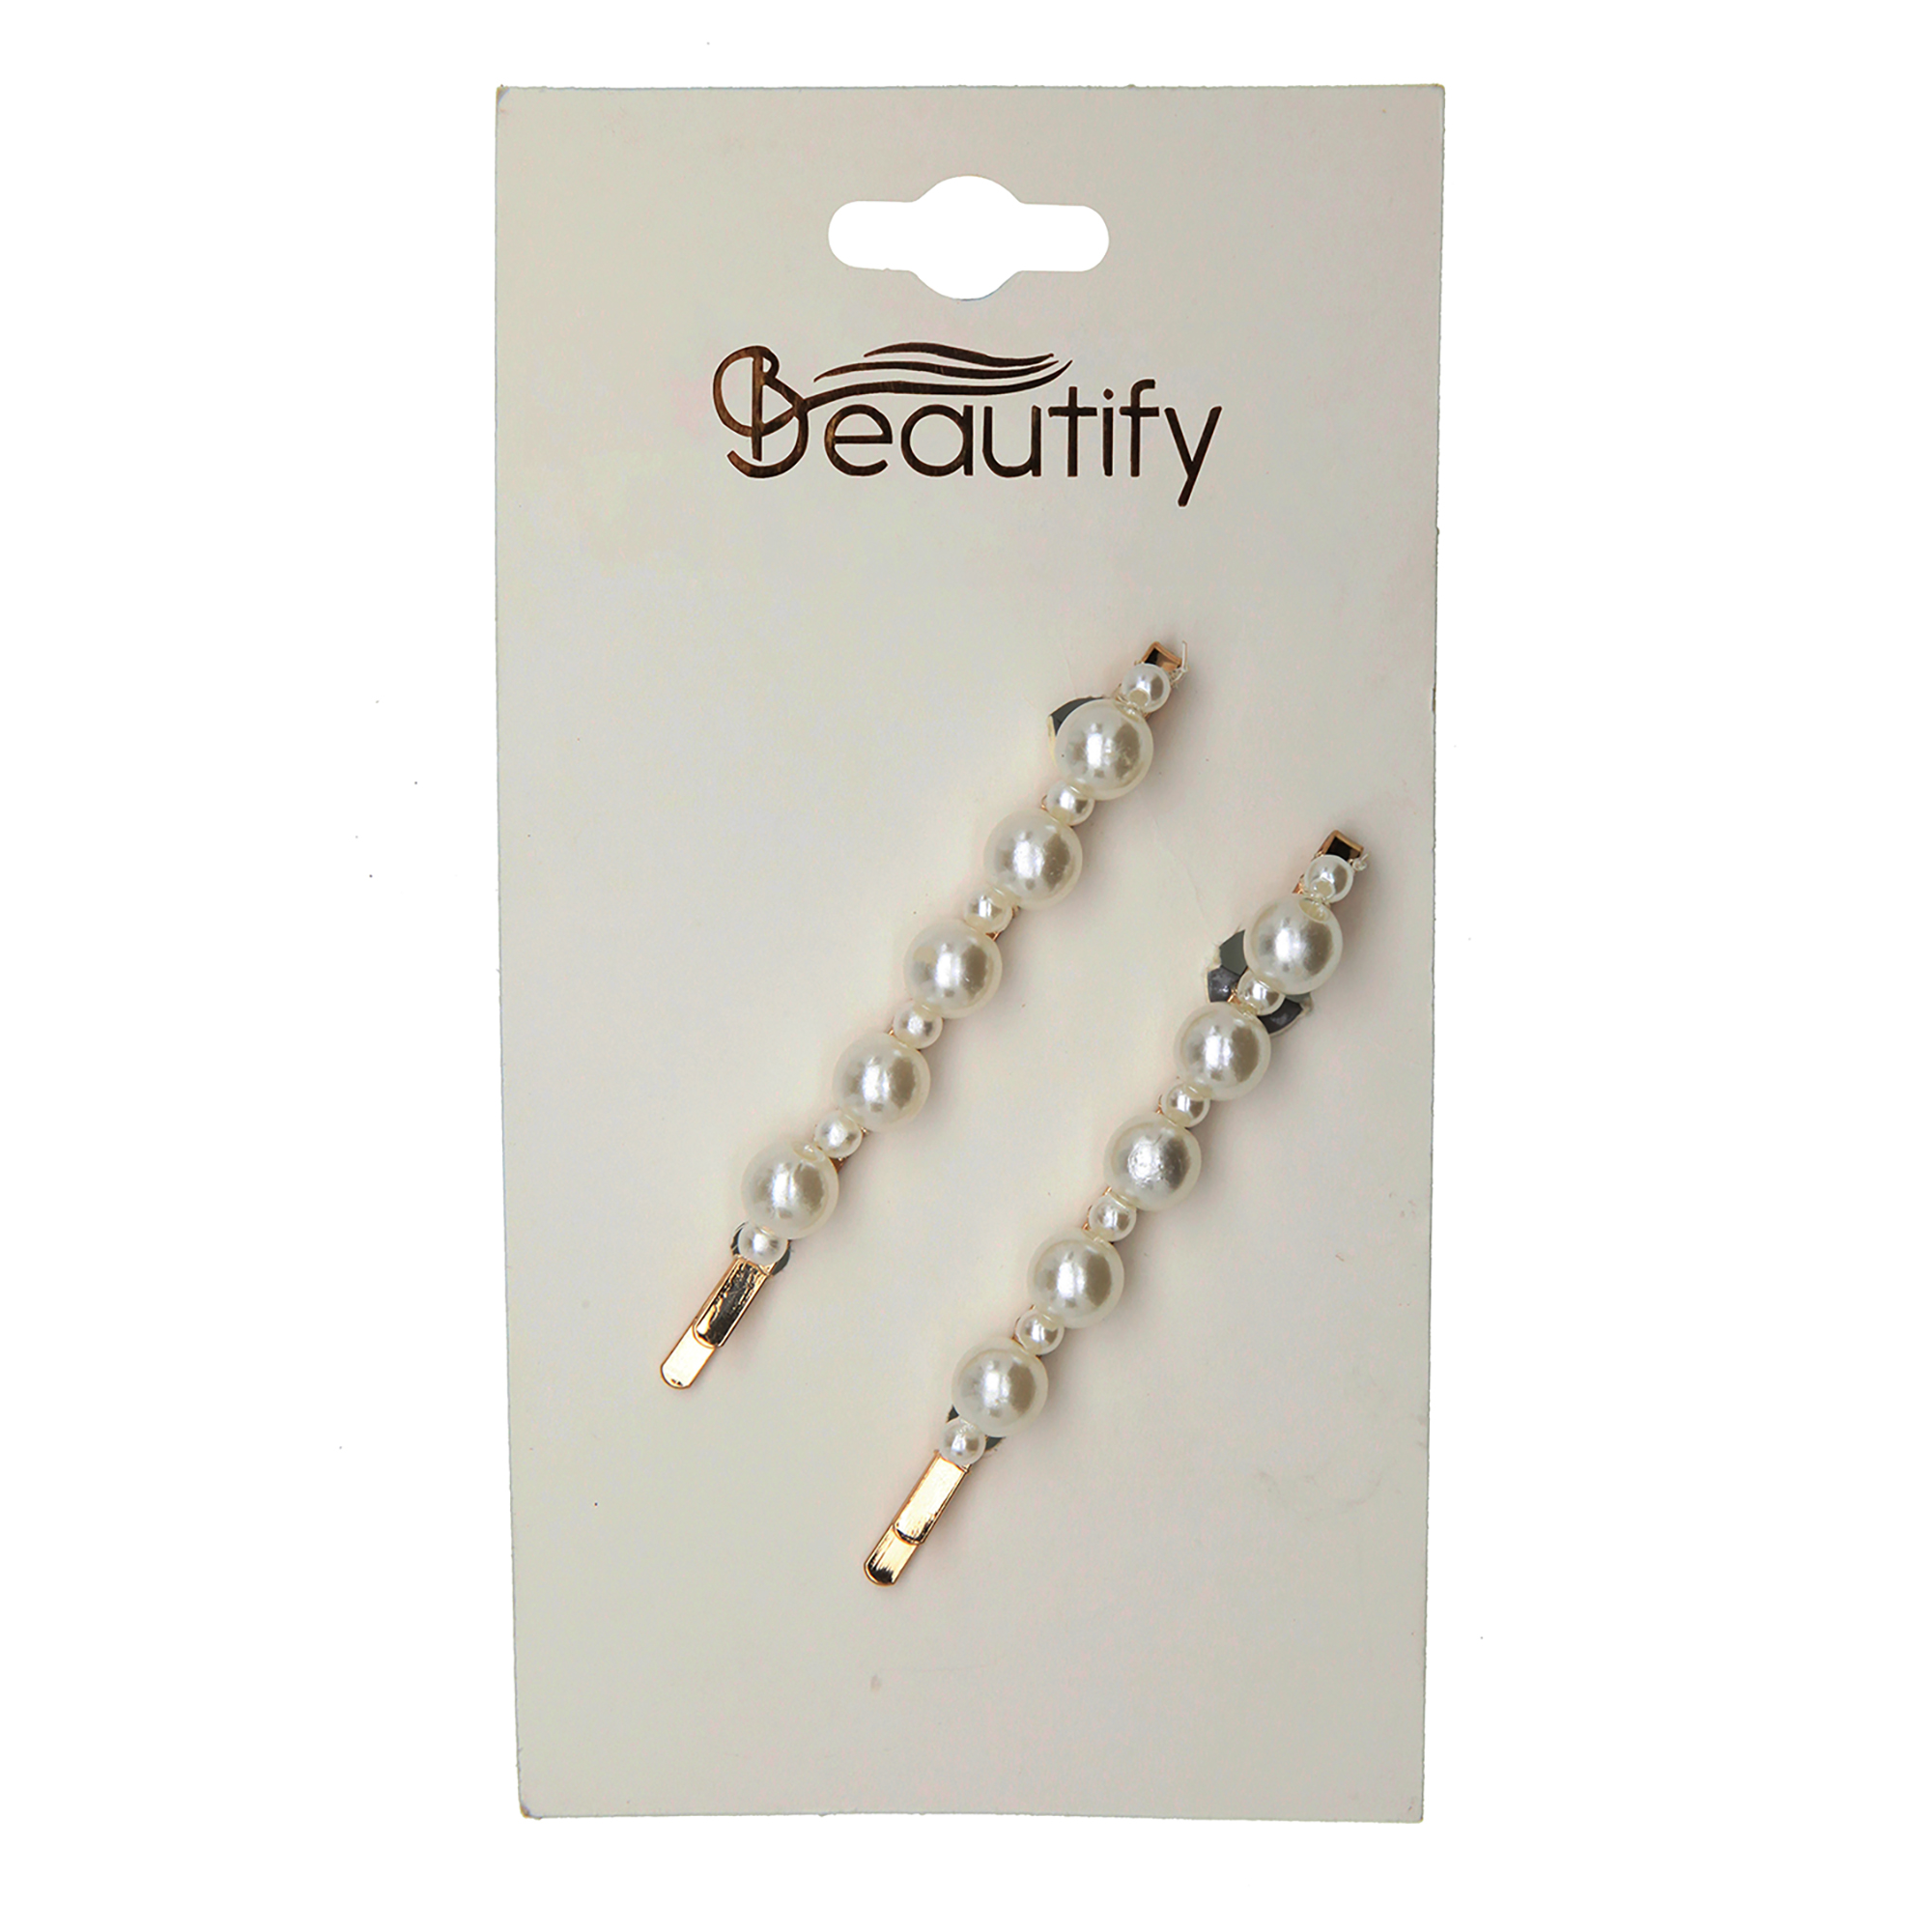 Faux pearl bobby pins